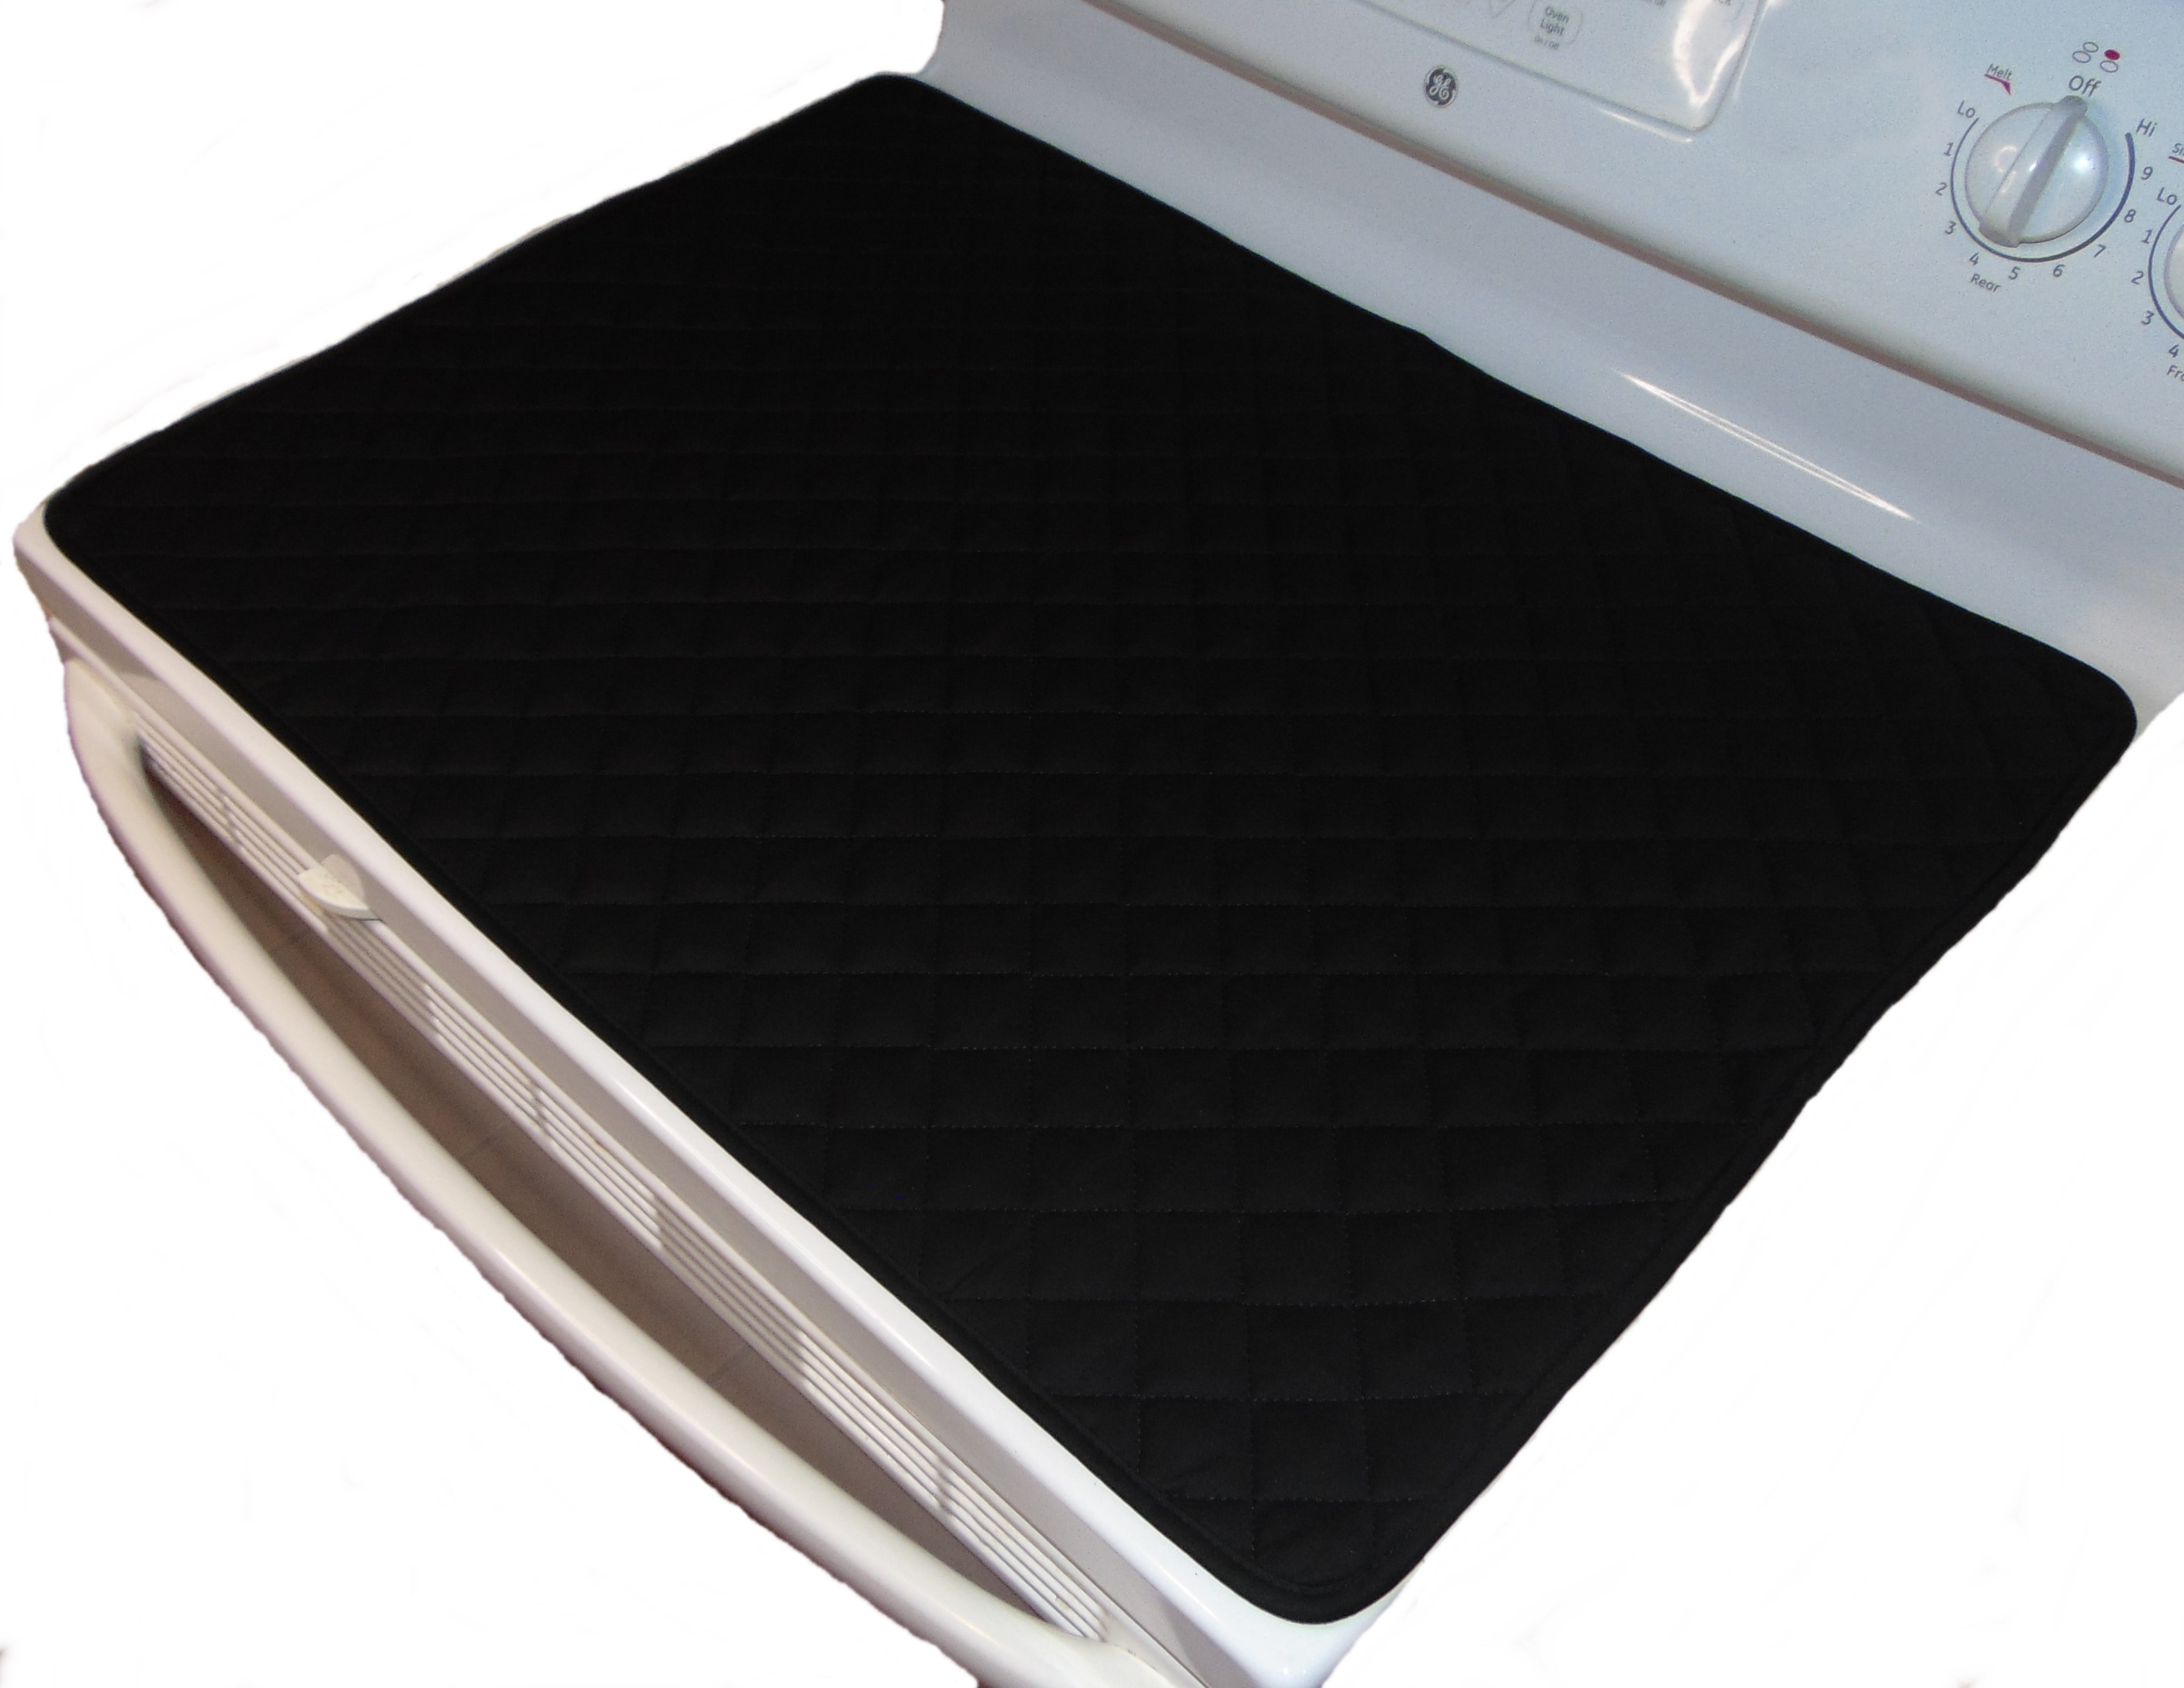 Quilted Material 100% Cotton Glass Cooktop ANGECA Stove Top Cover and Protector for Glass Burgundy Protects Electric Stove Ceramic Stove Washer Dryer Top 